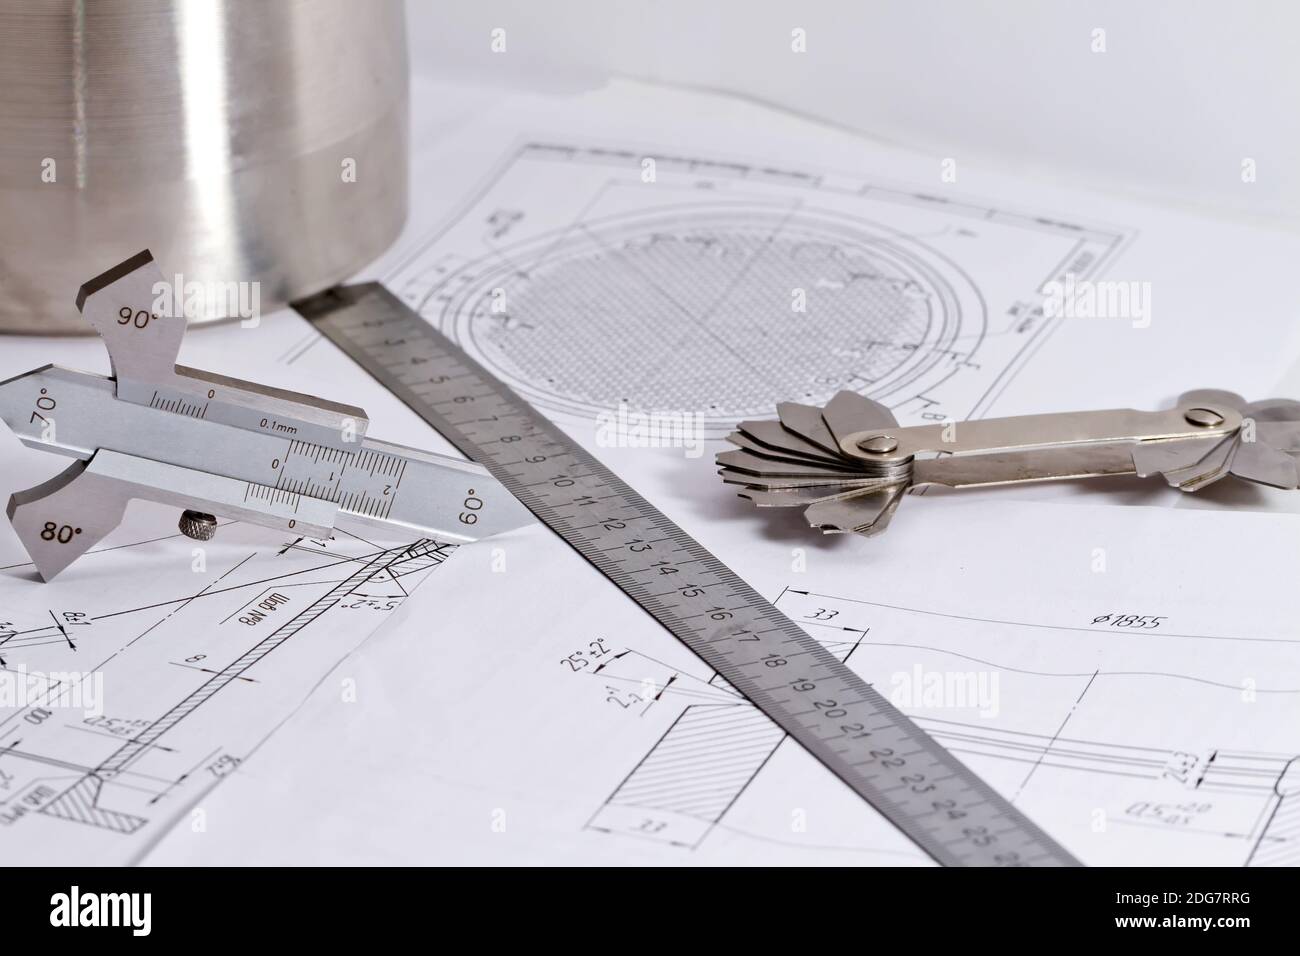 Templates for visual measurement control are on the drawing pipe element Stock Photo